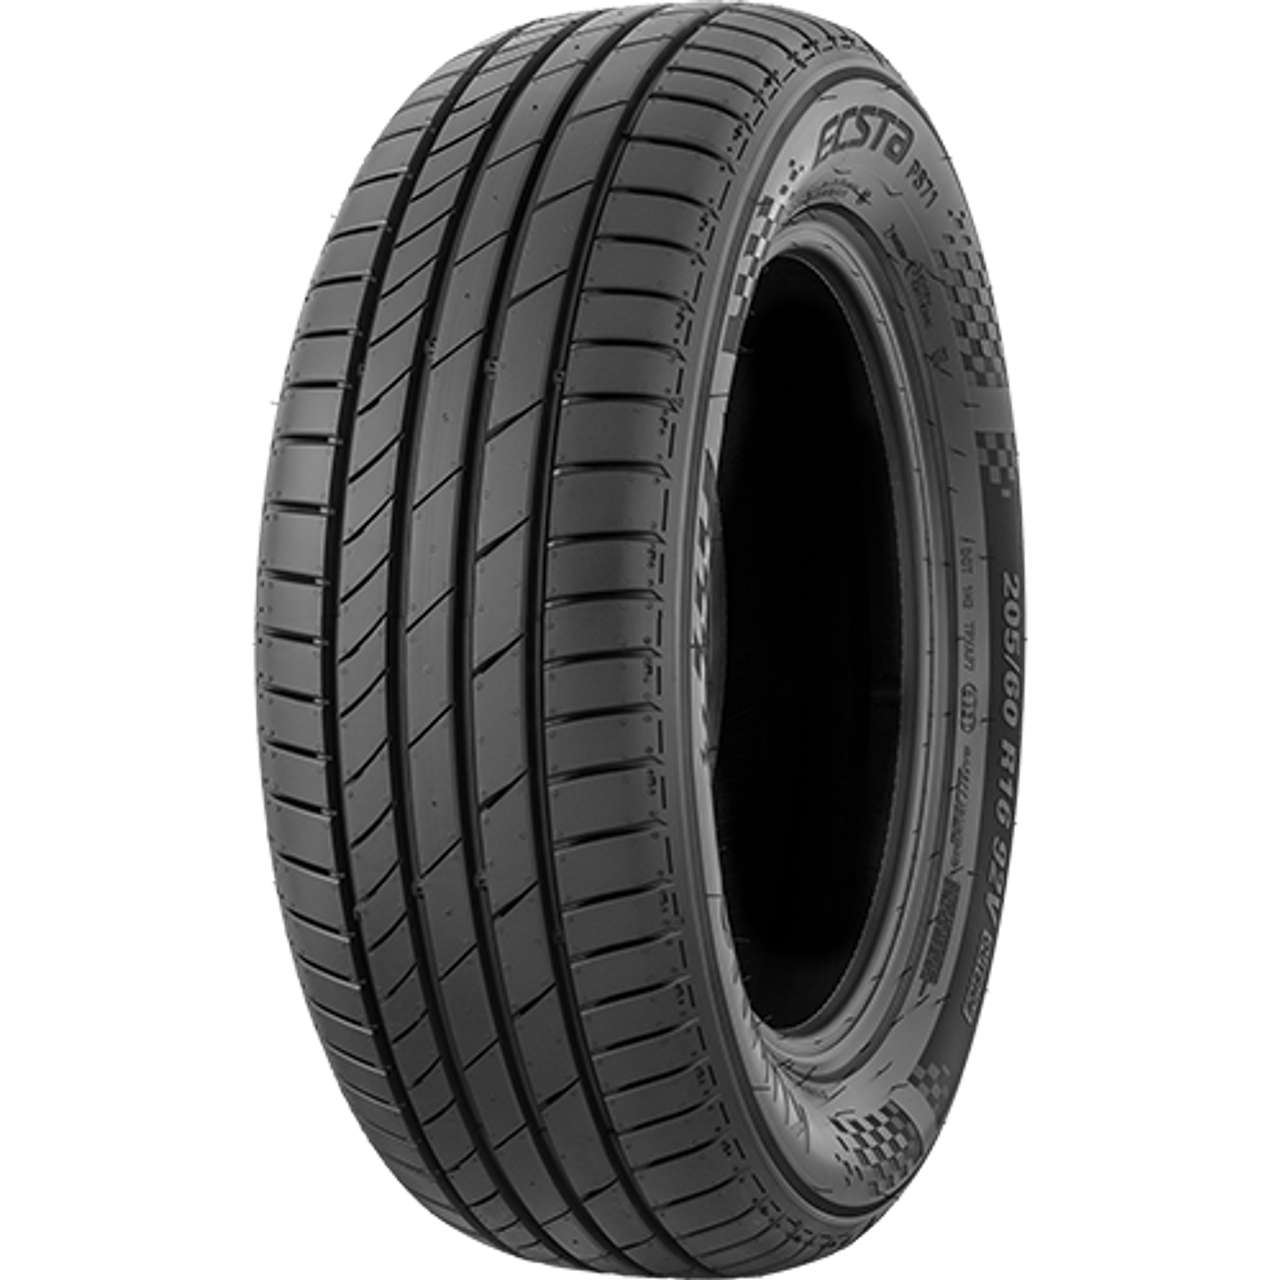 KUMHO ECSTA PS71 225/45ZR18 95Y BSW